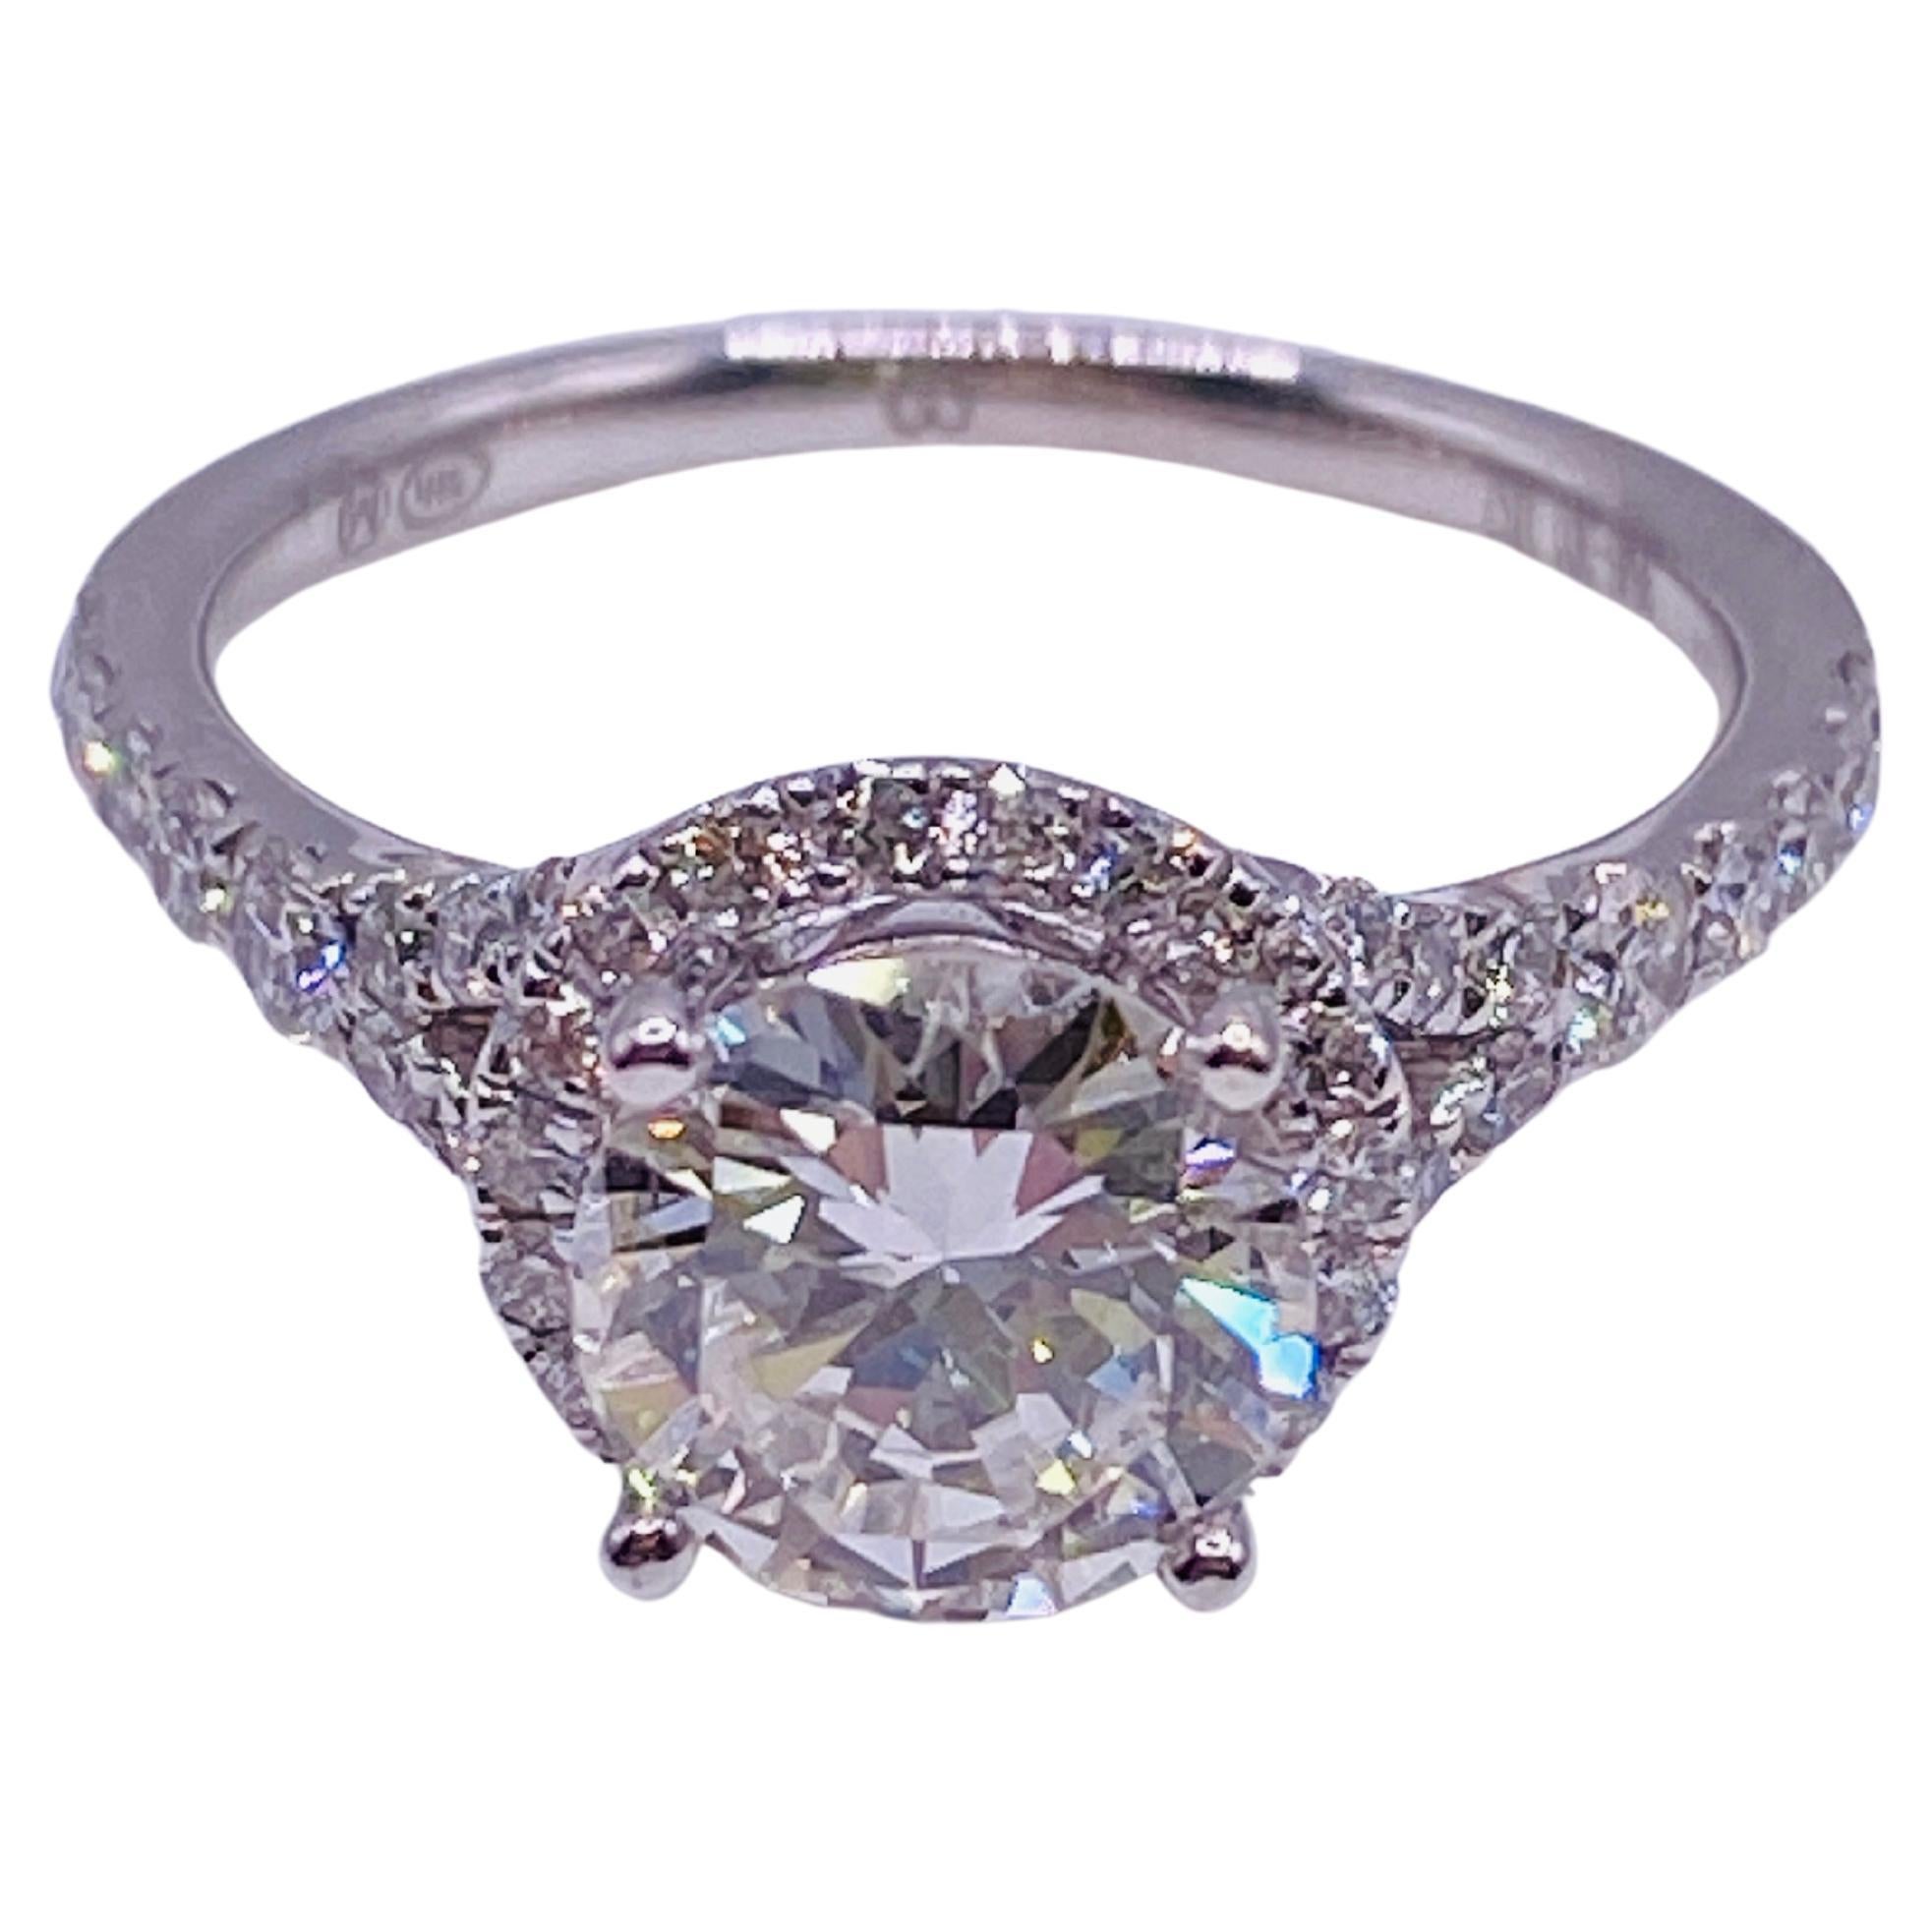 1.51 Carat Round Brilliant Cut Diamond Engagement Ring with Semi Mount Setting For Sale